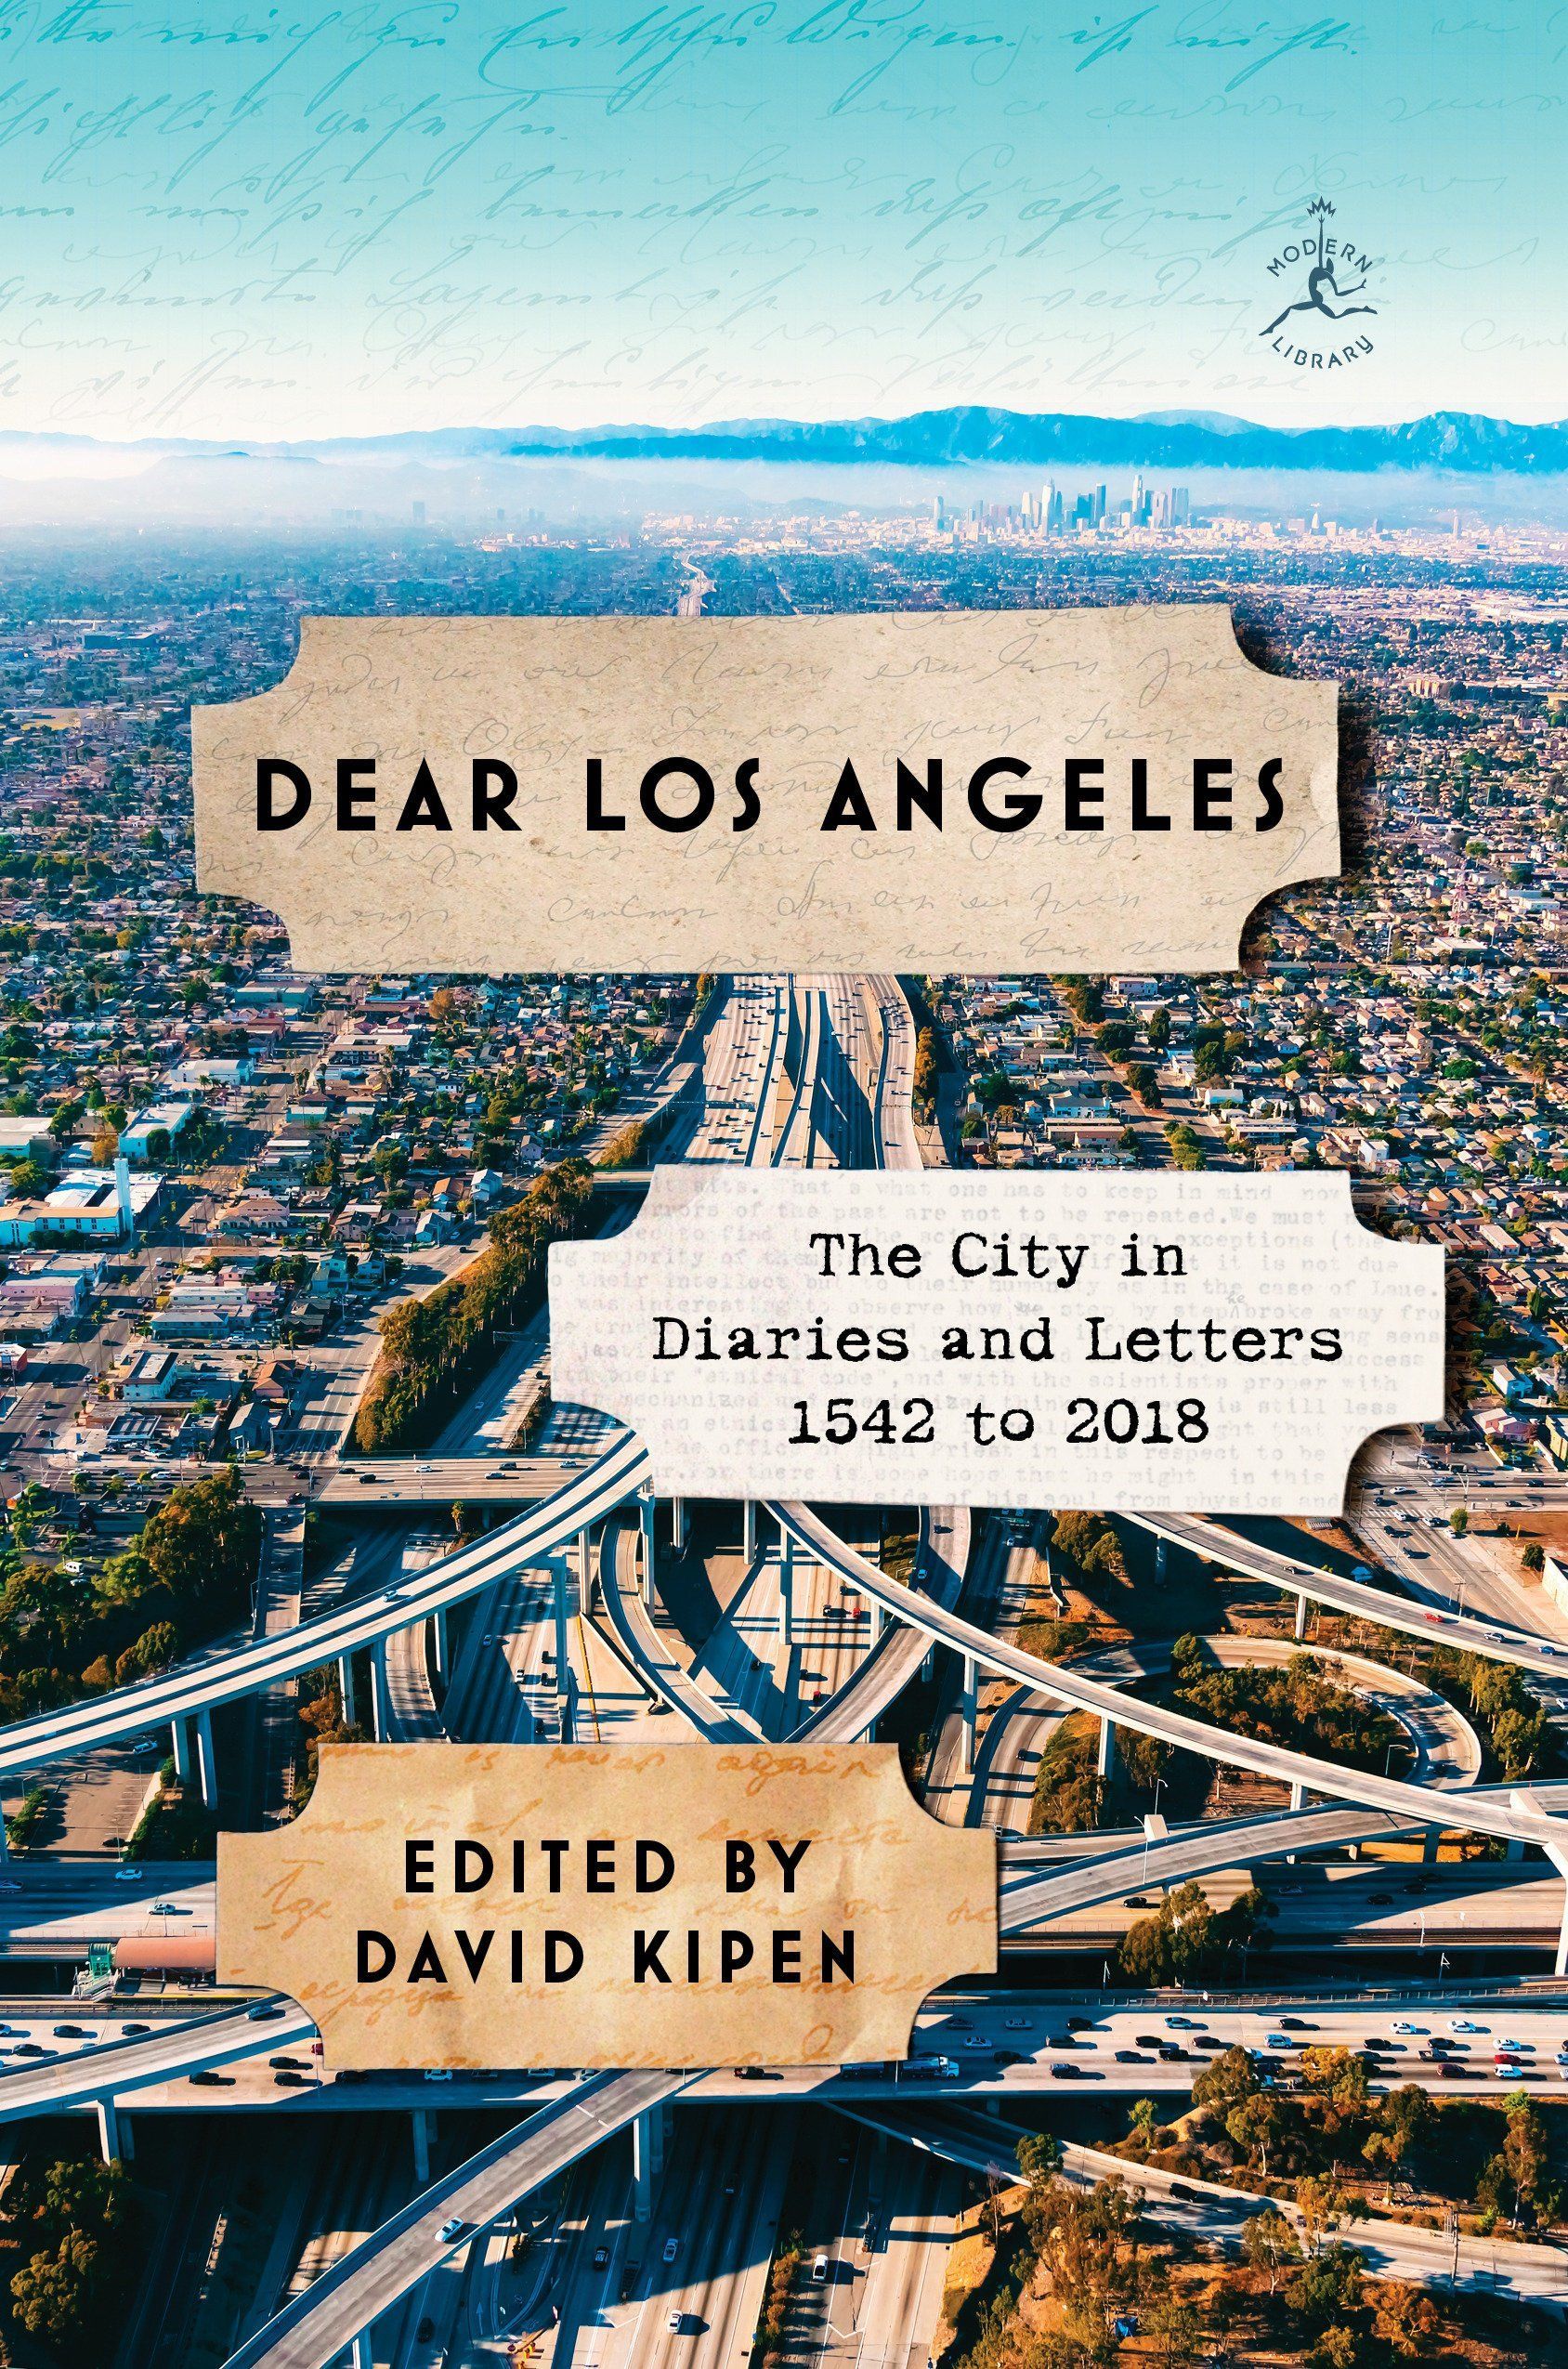 Dark Knights and Sunny Disquisitions: On David Kipen’s “Dear Los Angeles: The City in Diaries and Letters, 1542 to 2018”